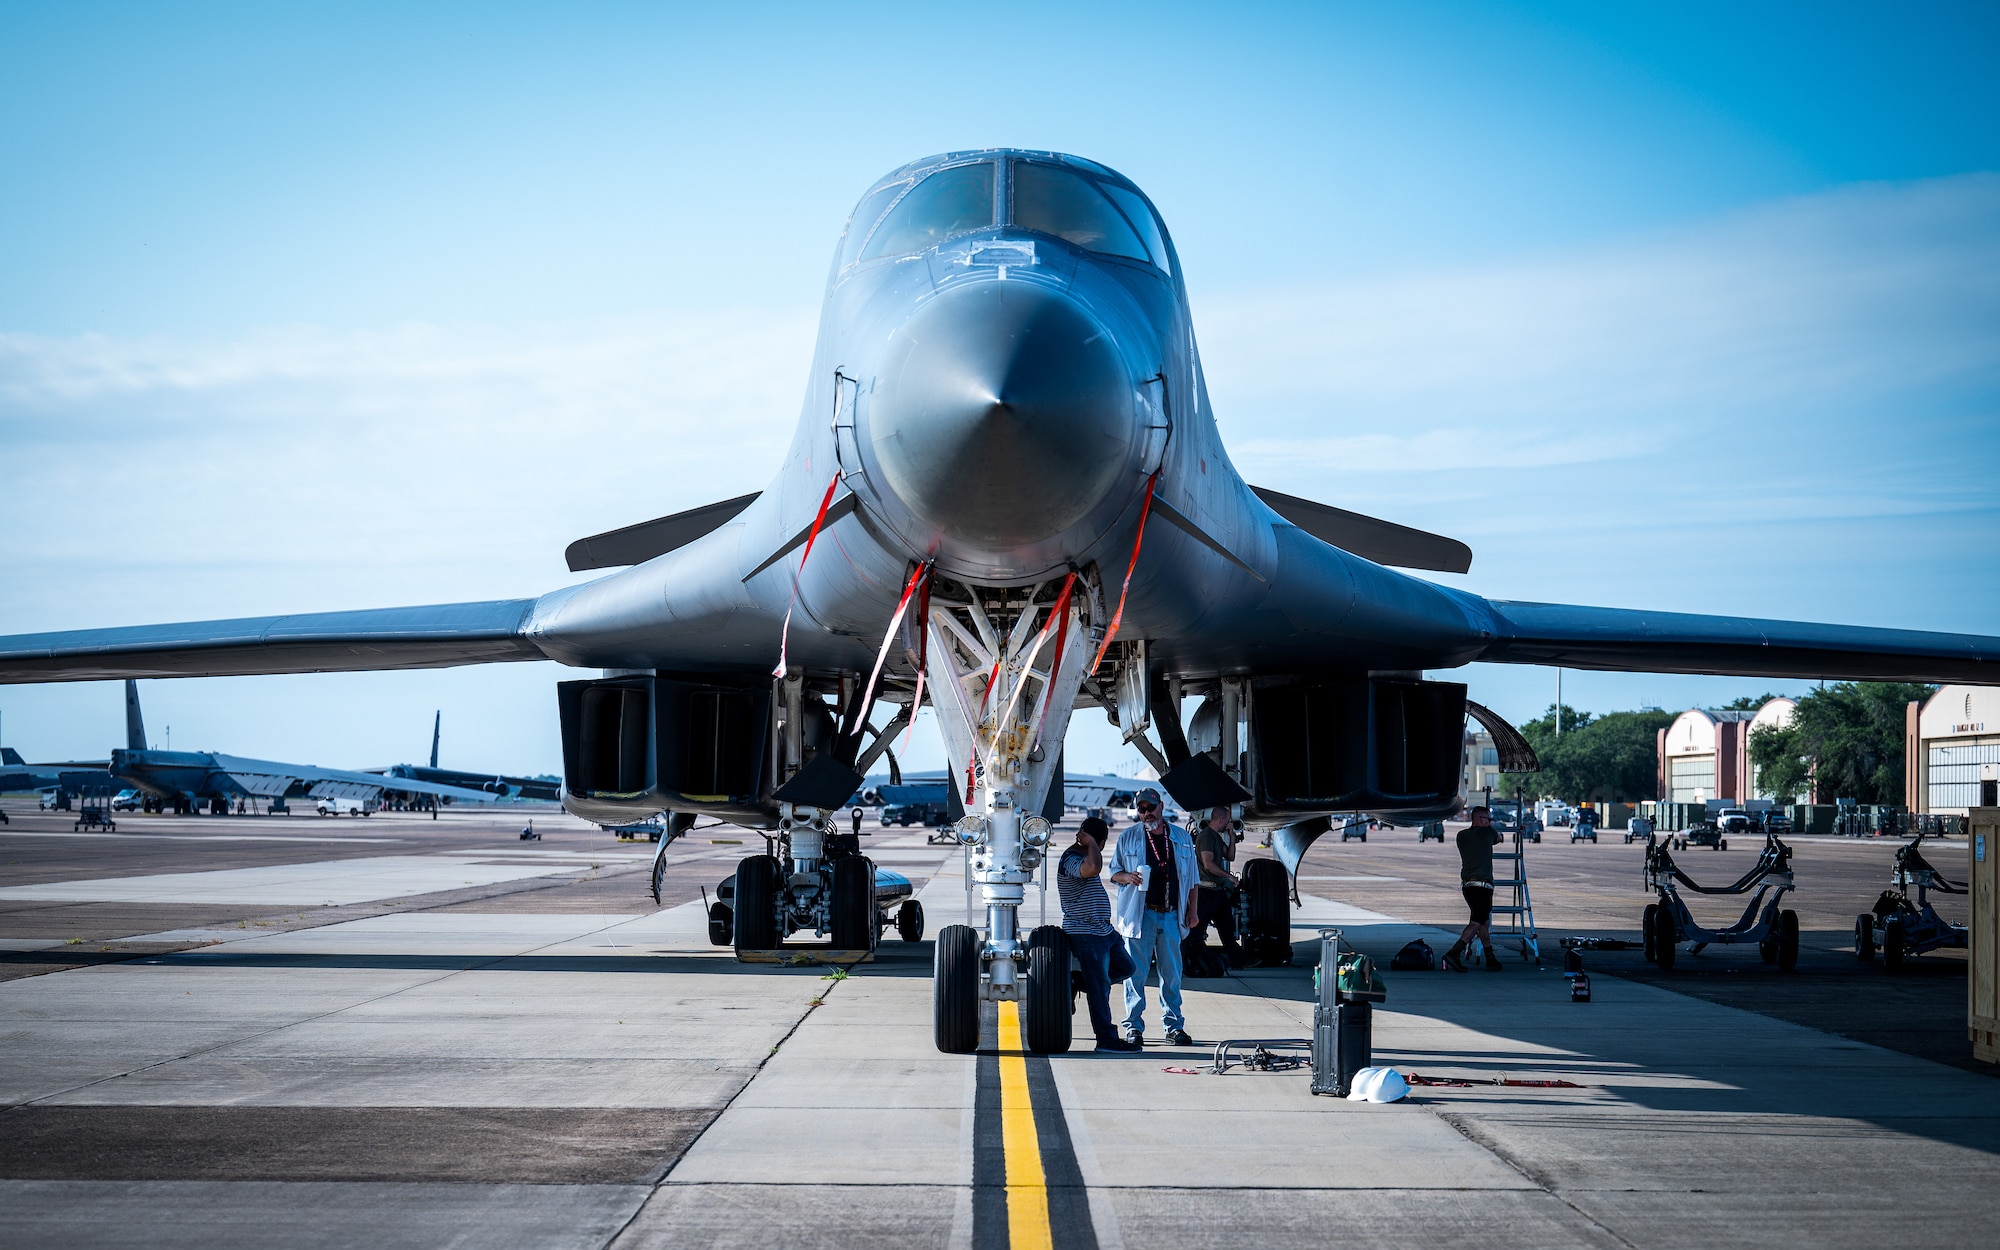 Airmen from Dyess Air Force Base, Texas, prepare to remove parts from a decommissioned B-1B Lancer at Barksdale Air Force Base, Louisiana, July 7, 2021.